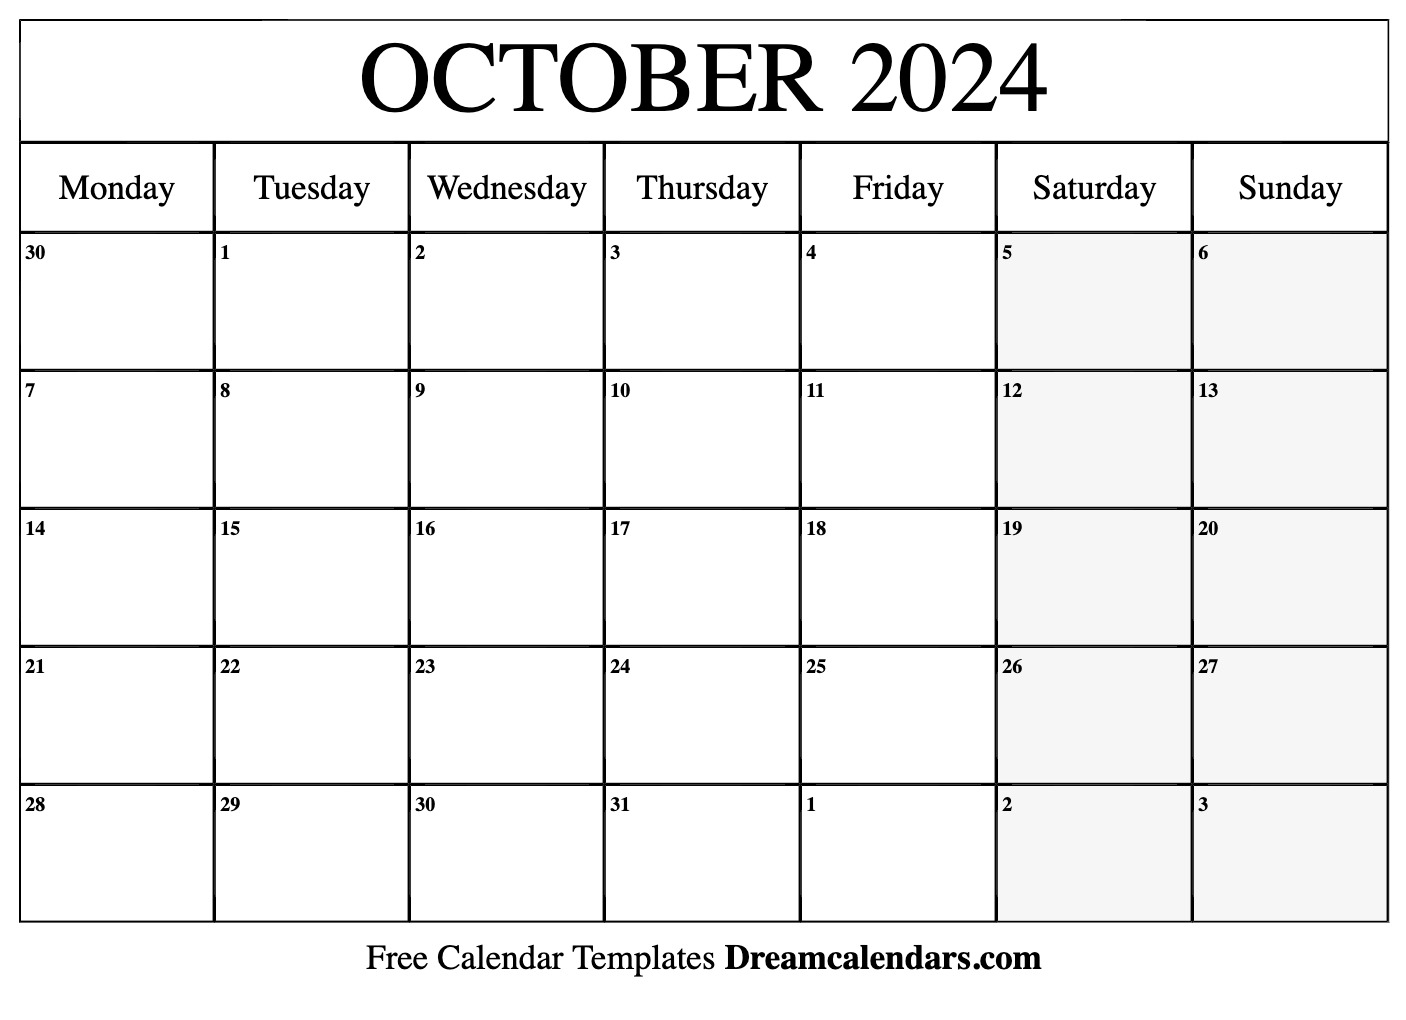 October 2024 calendar Free blank printable with holidays